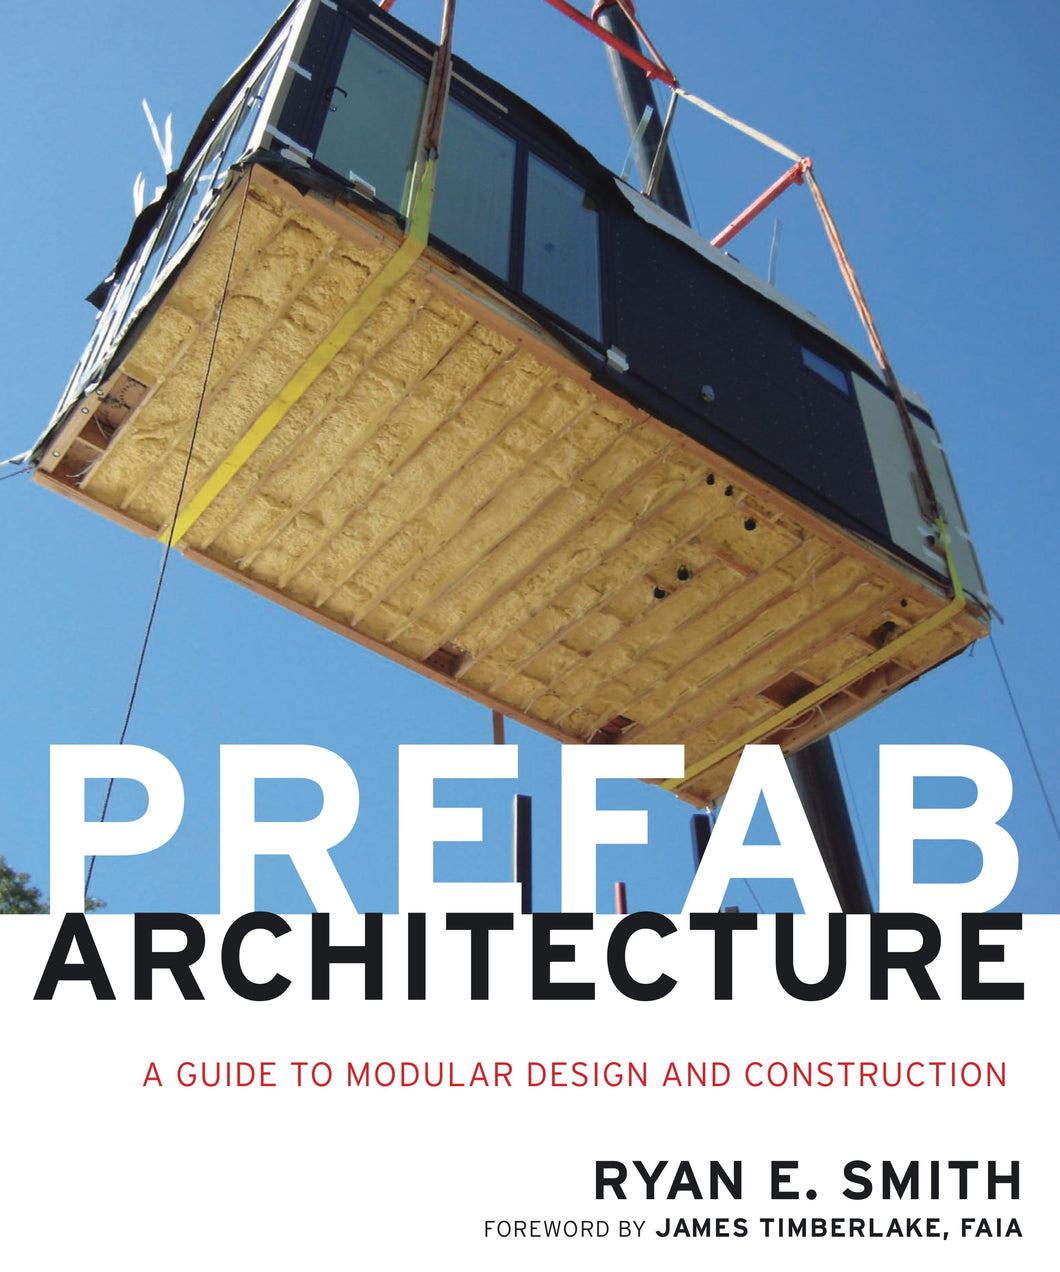 Prefab Architecture: A Guide to Modular Design and Construction 1st Edition